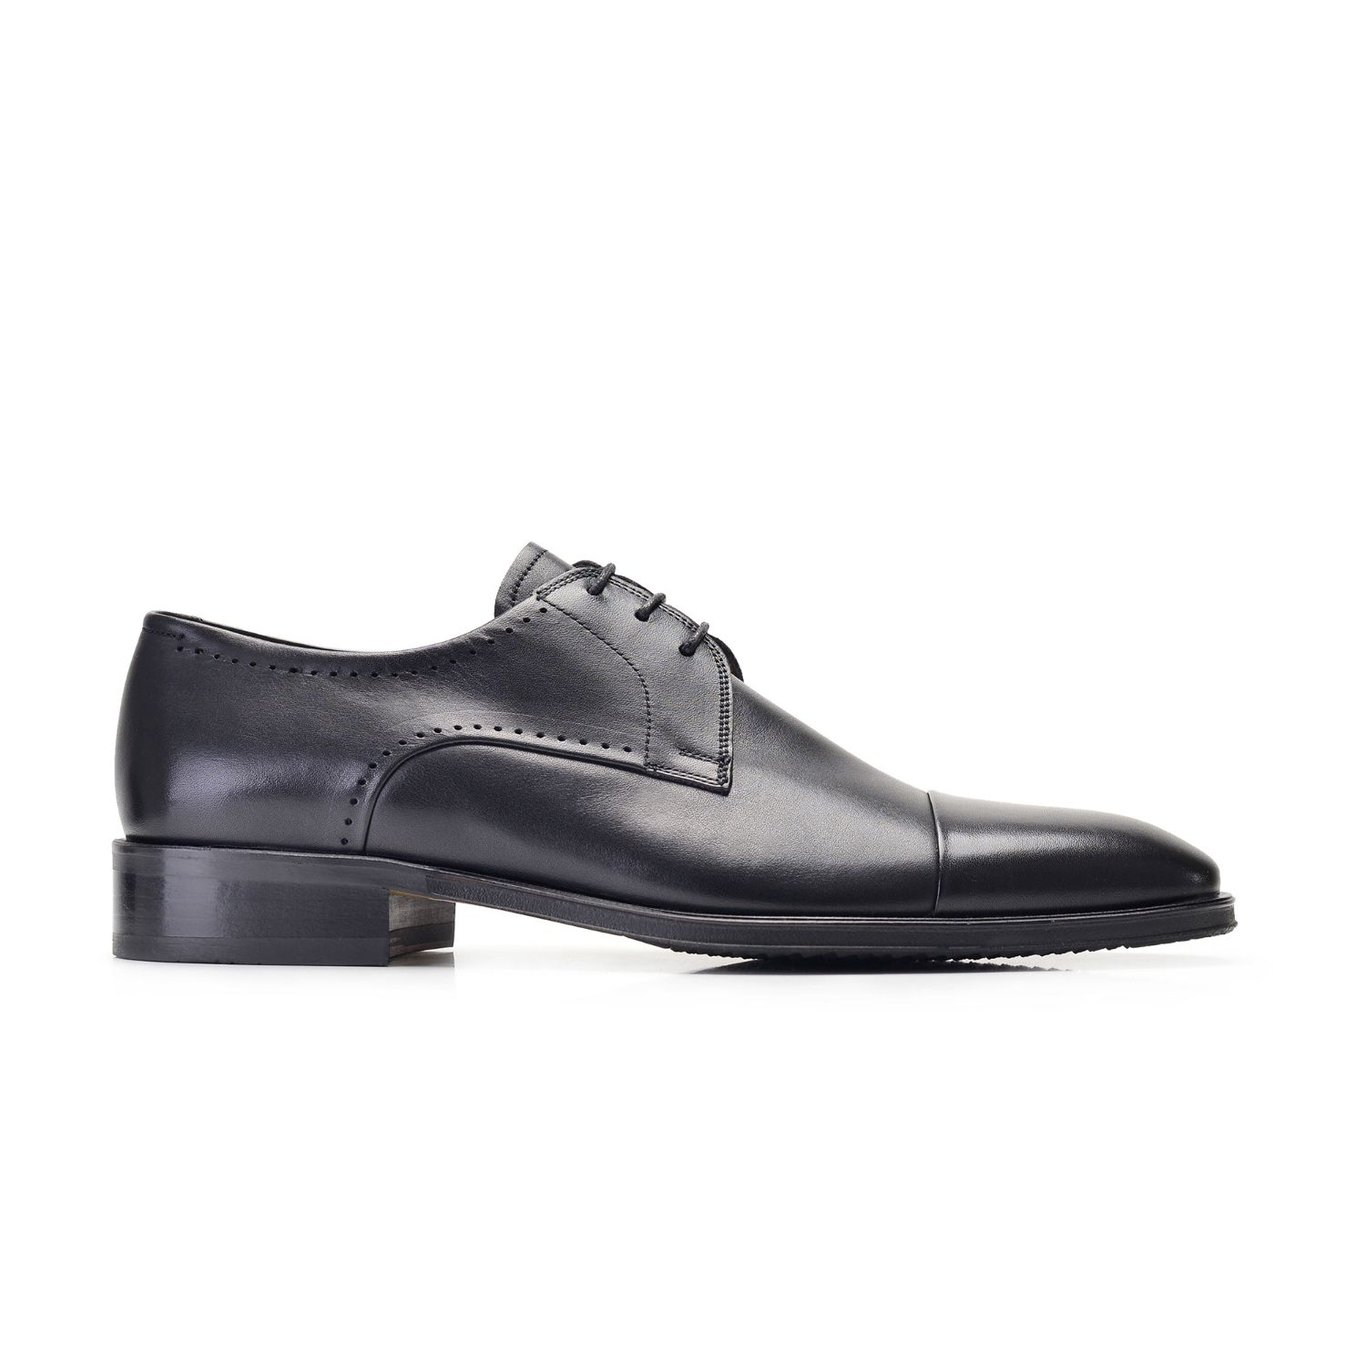 Nevzat Onay Genuine Leather Black Men Classical Shoes -11956-